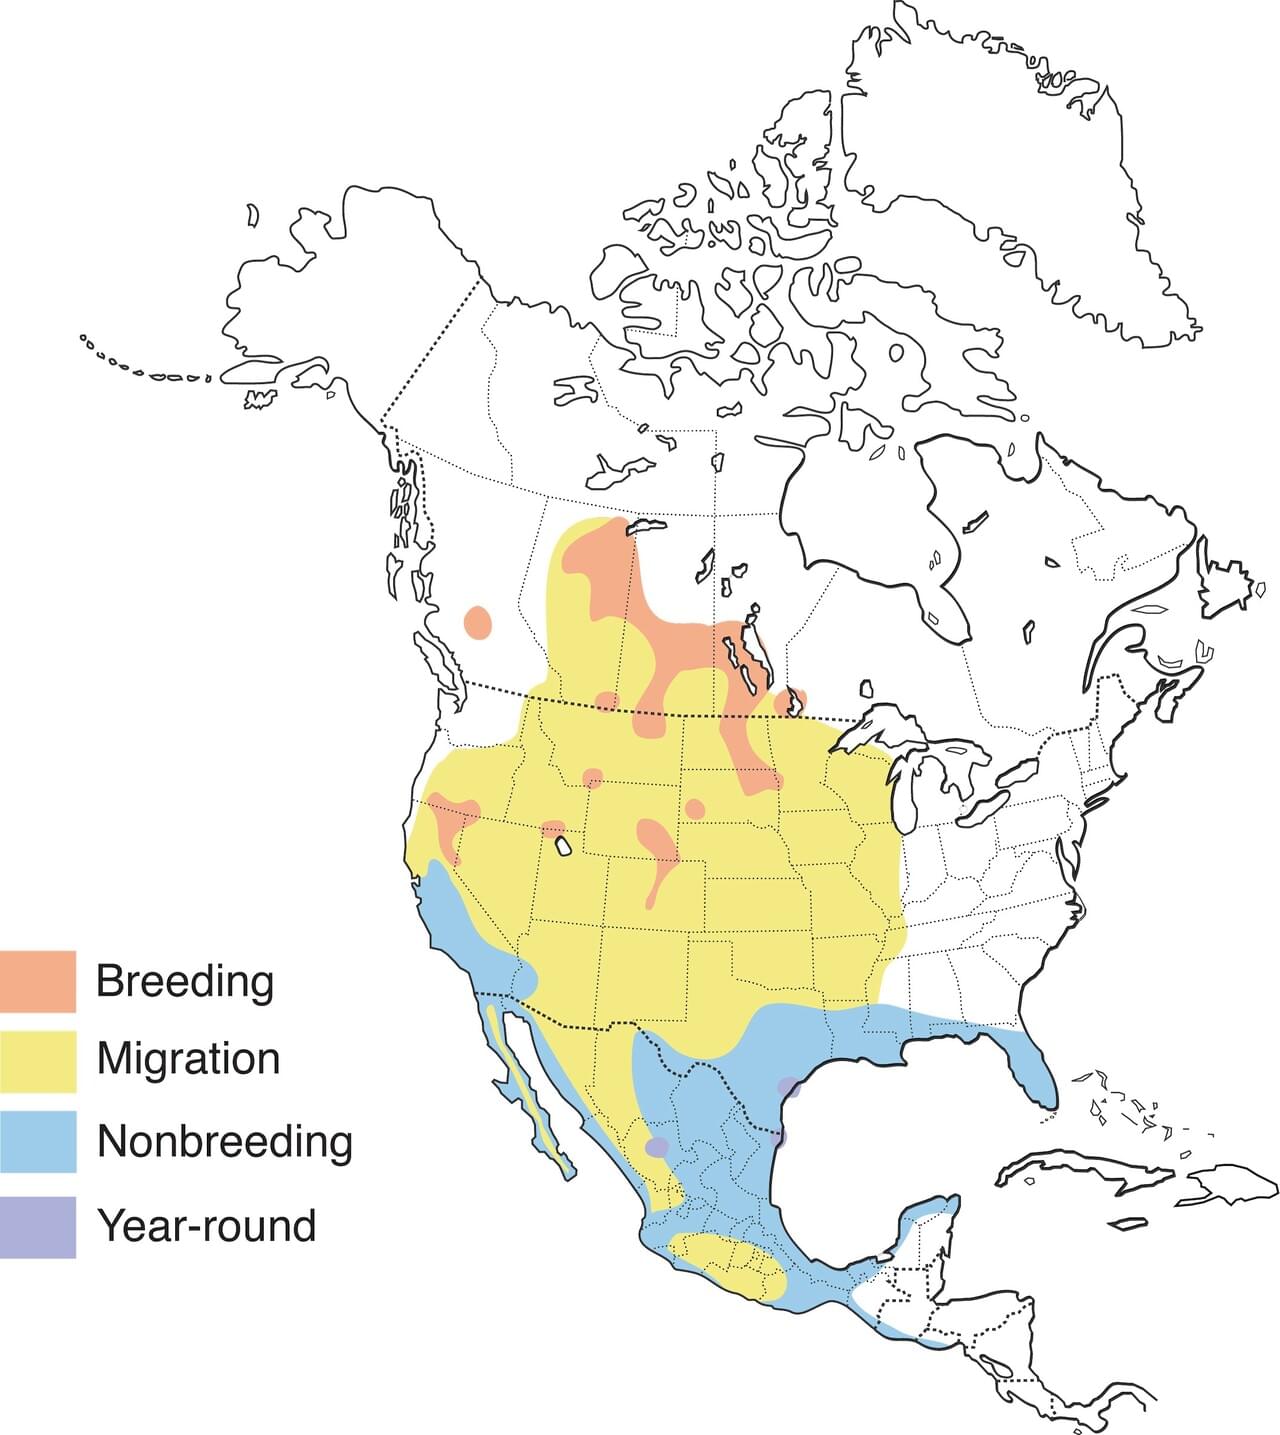 Range map of American white pelicans indicating they winter in Florida, the gulf states, mexico, and central america.